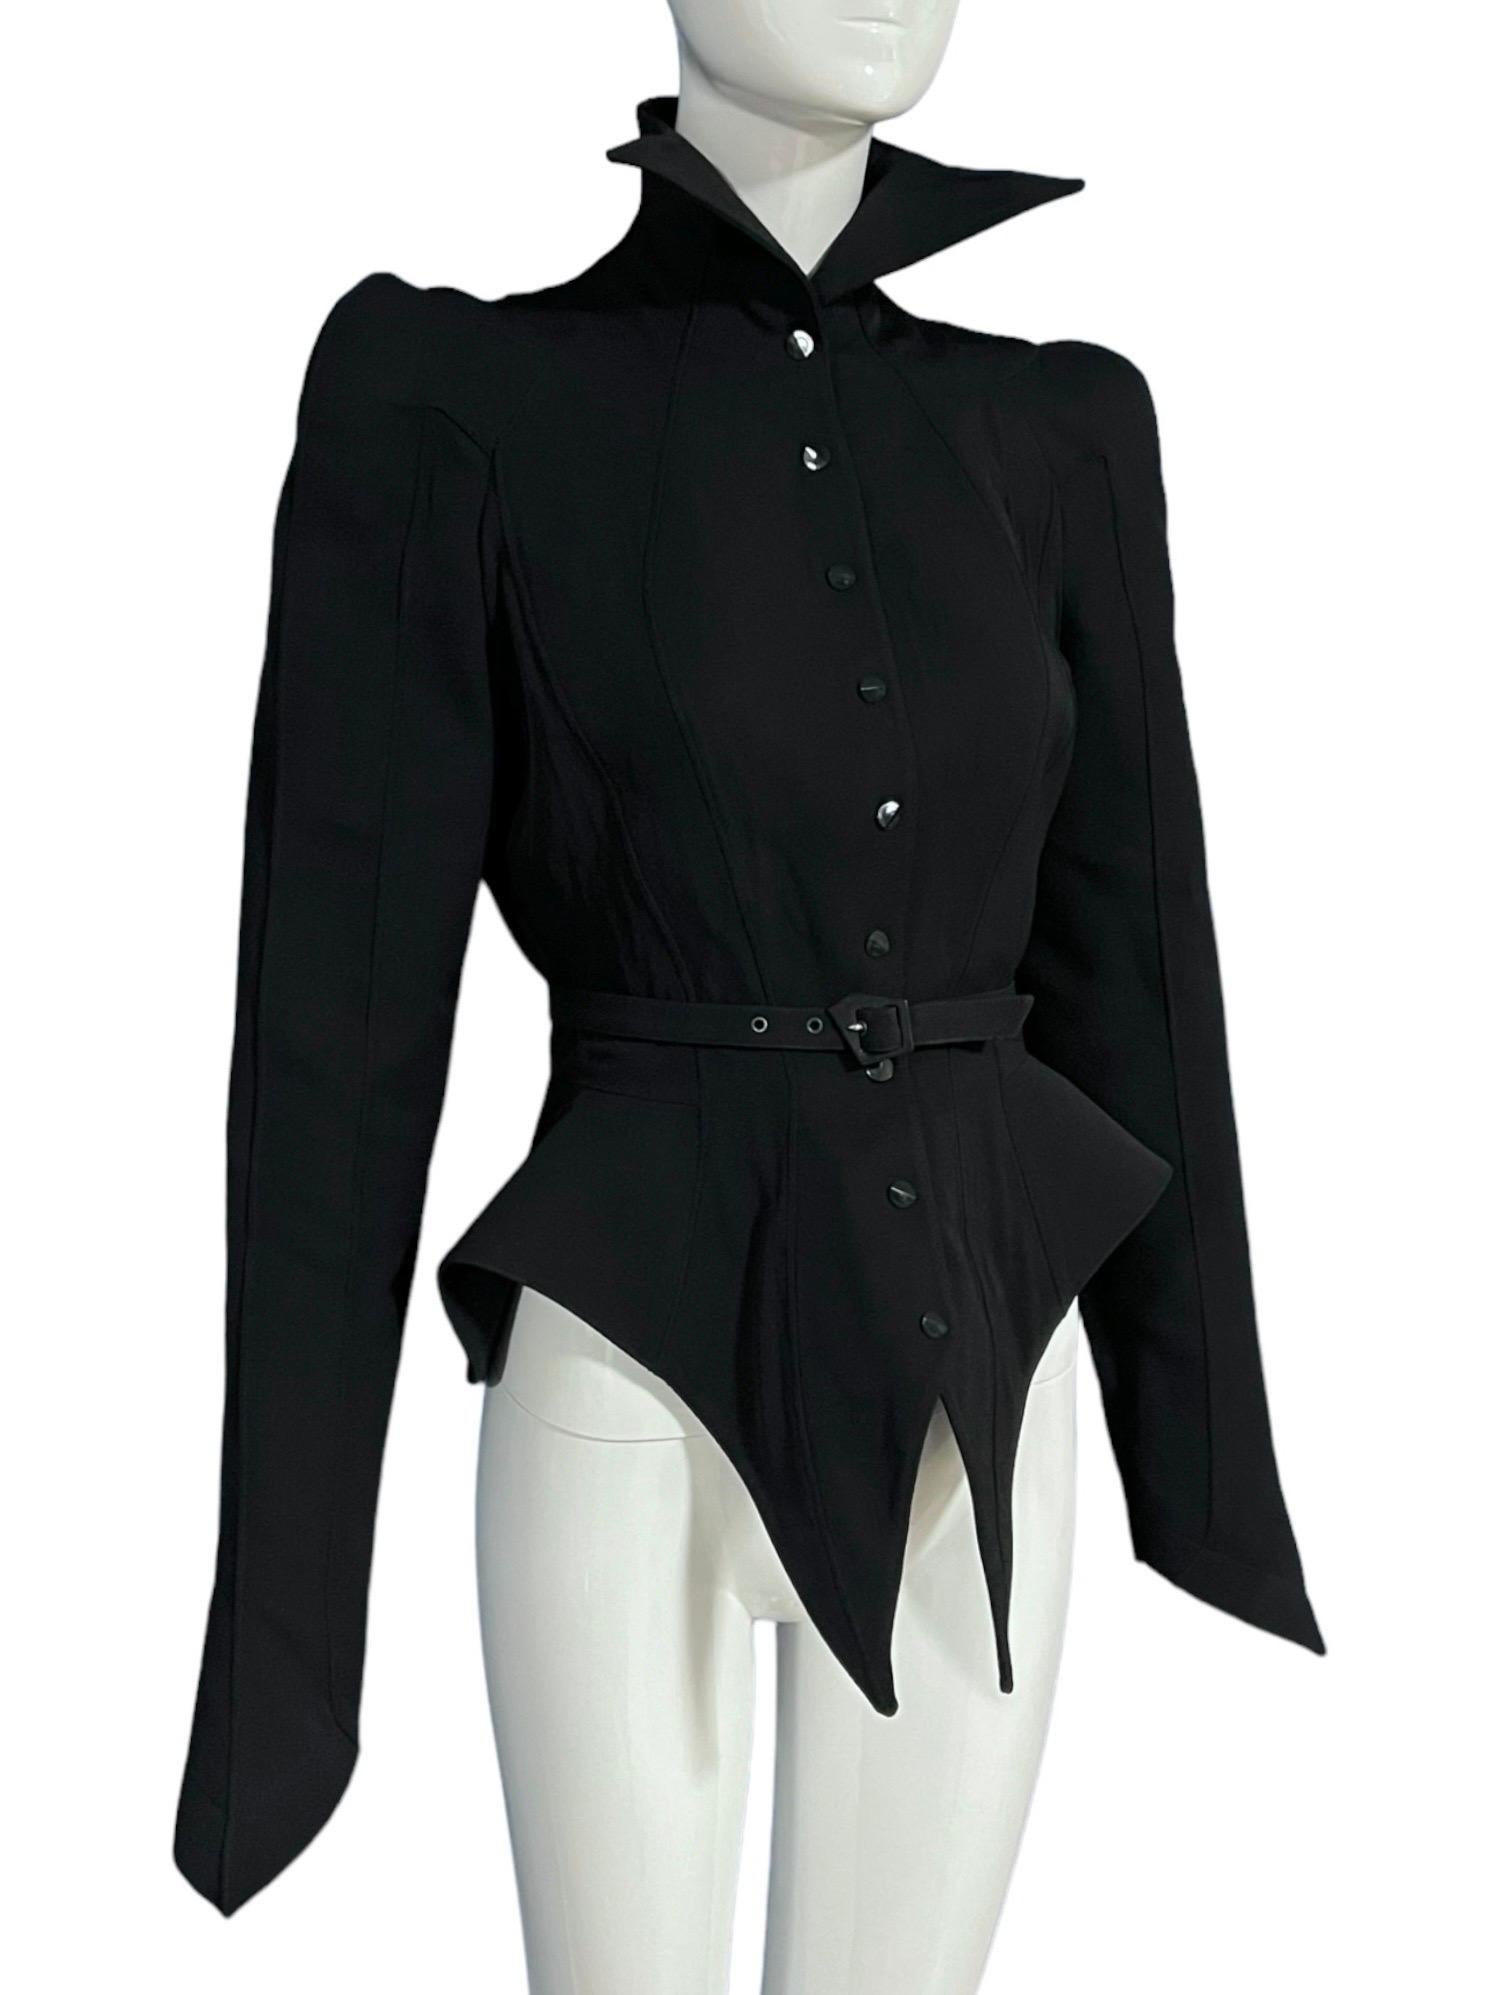 F/W 1988 Thierry Mugler Black Les Infernales Structural Runway Jacket In Excellent Condition For Sale In Concord, NC